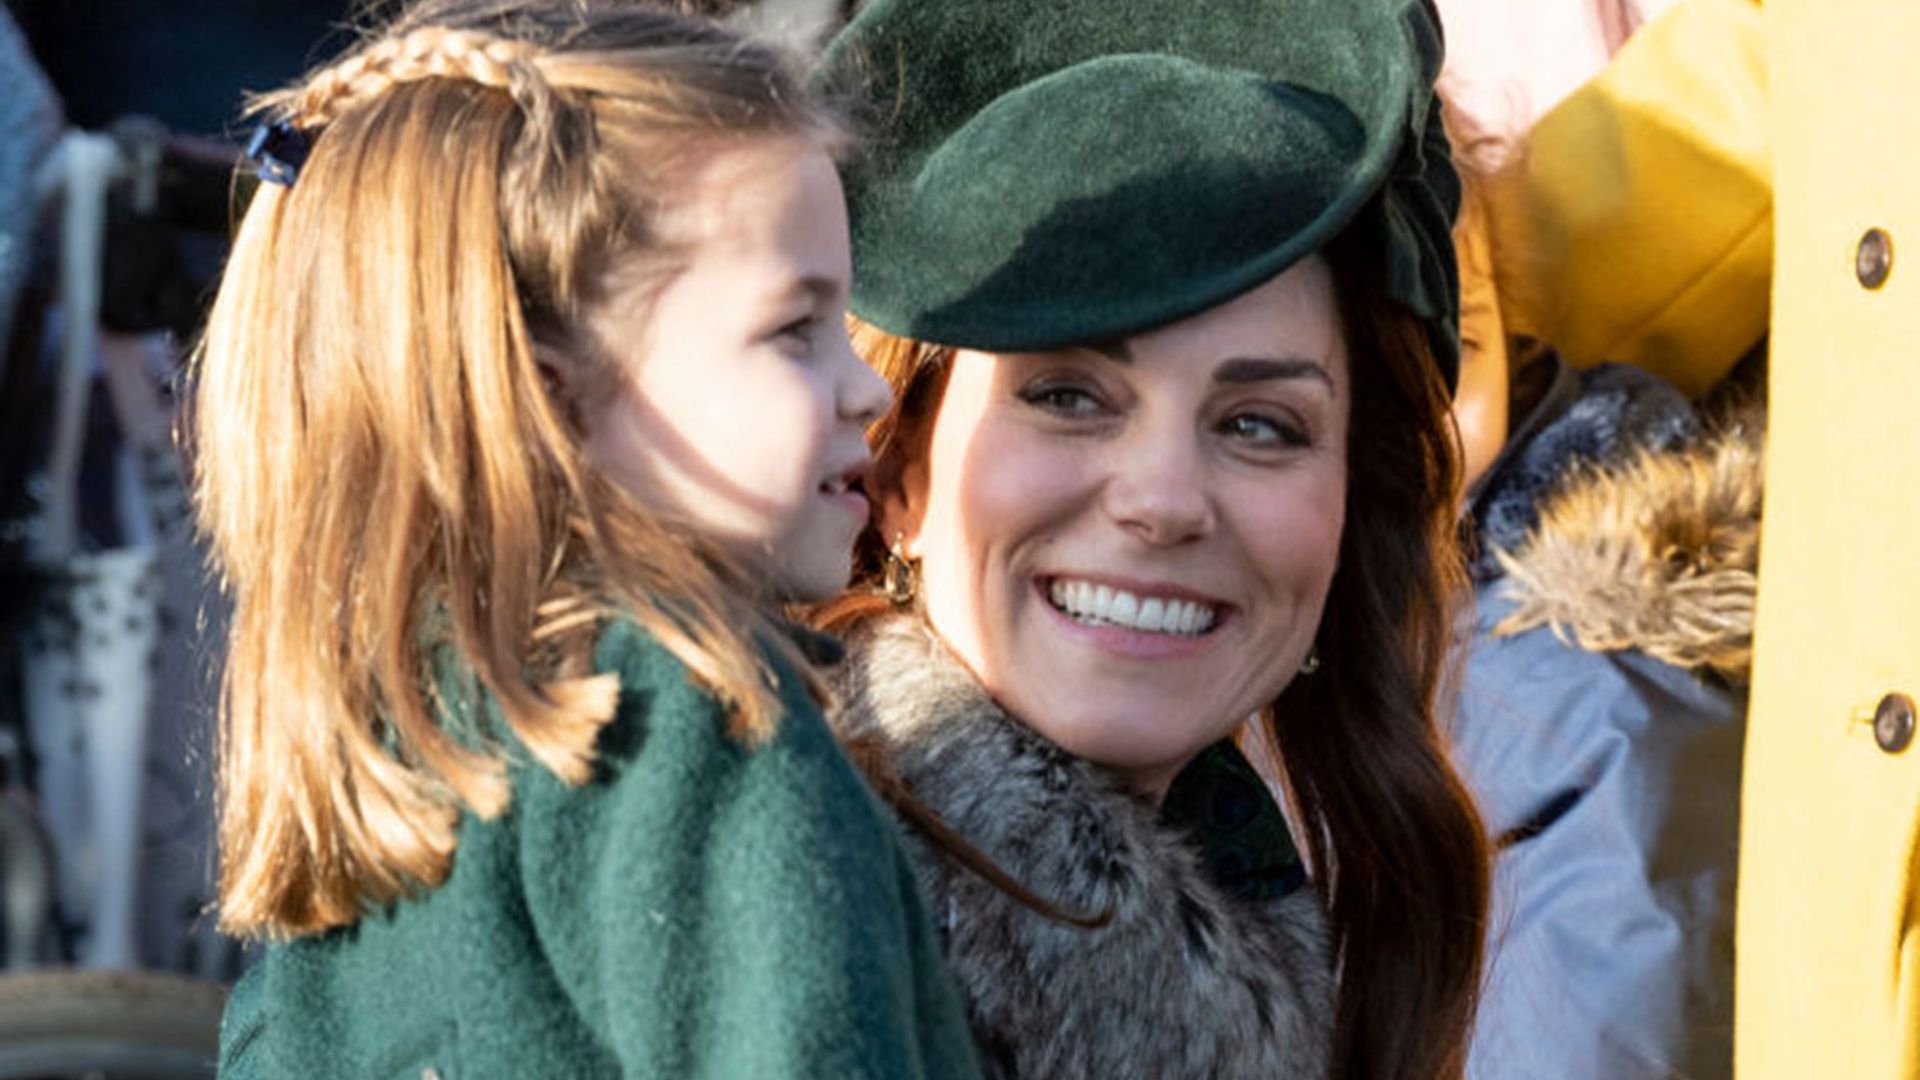 Kate Middleton would love Reiss' new childrenswear range for Princess Charlotte